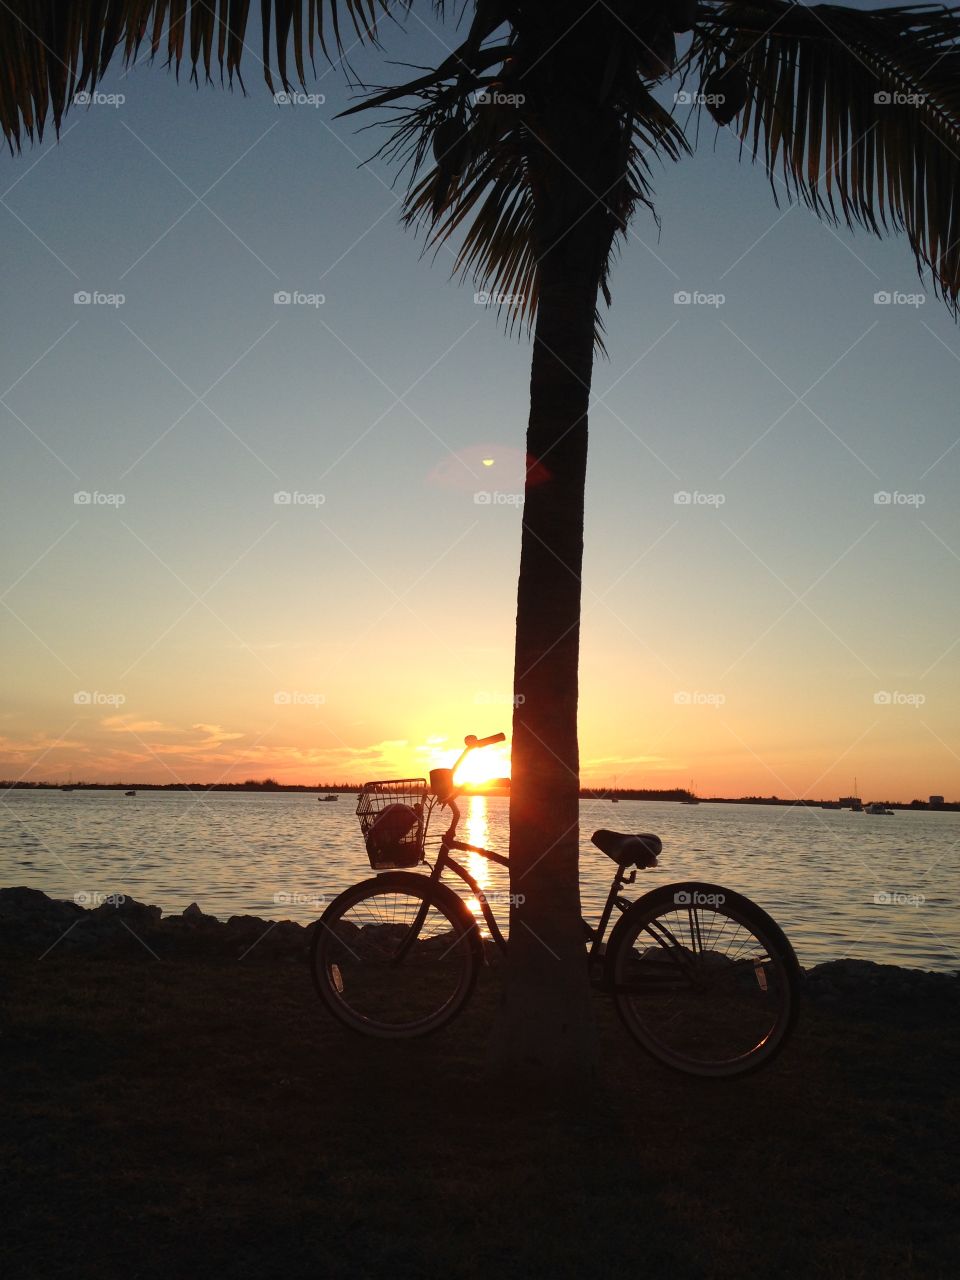 Bicycle sunset